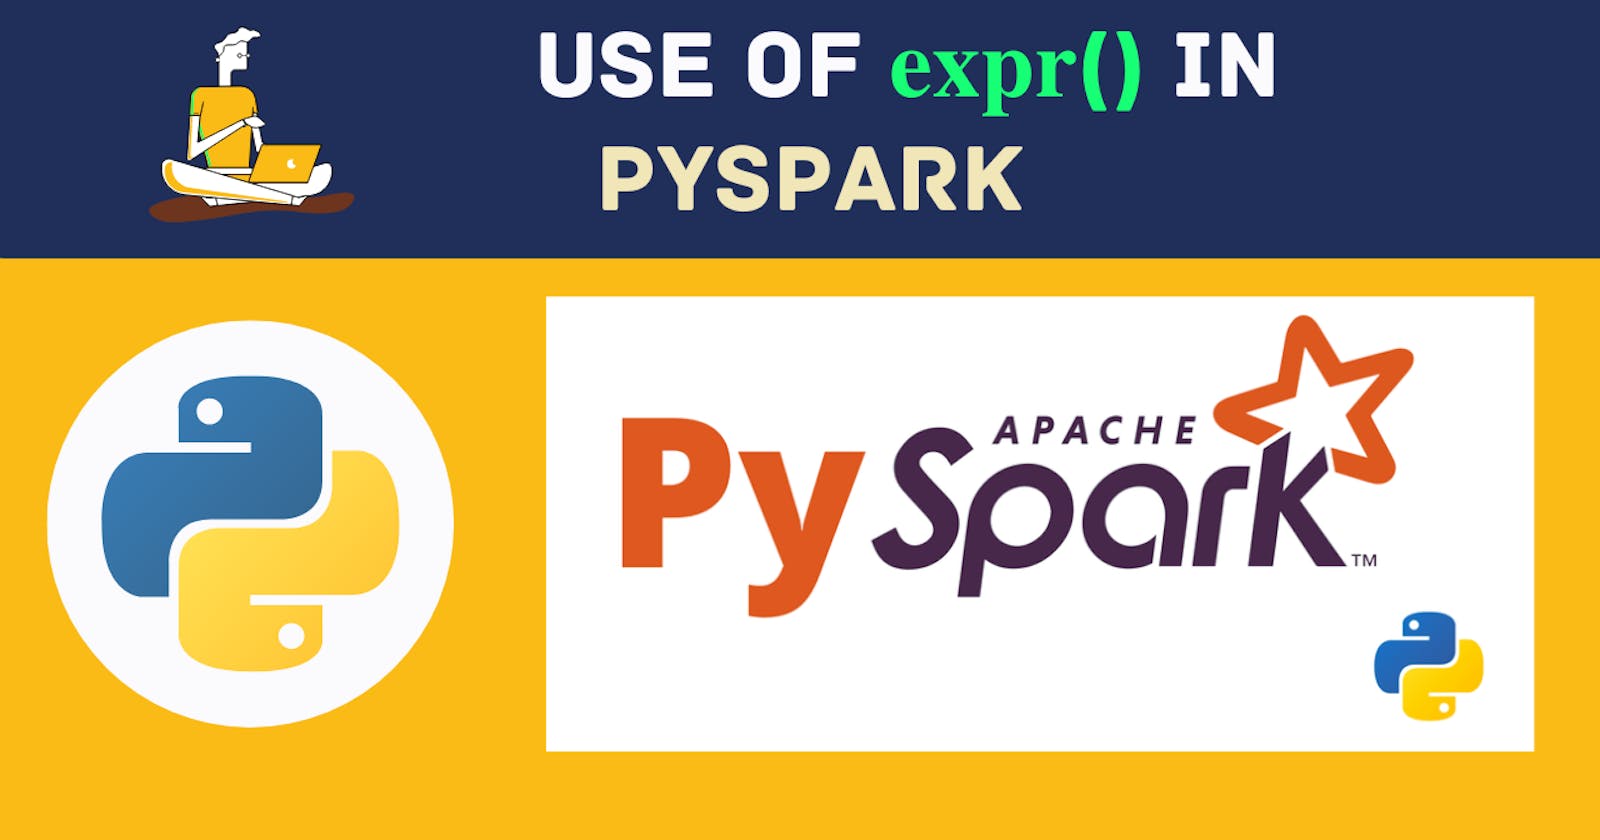 The use case of 𝐞𝐱𝐩𝐫() in PySpark